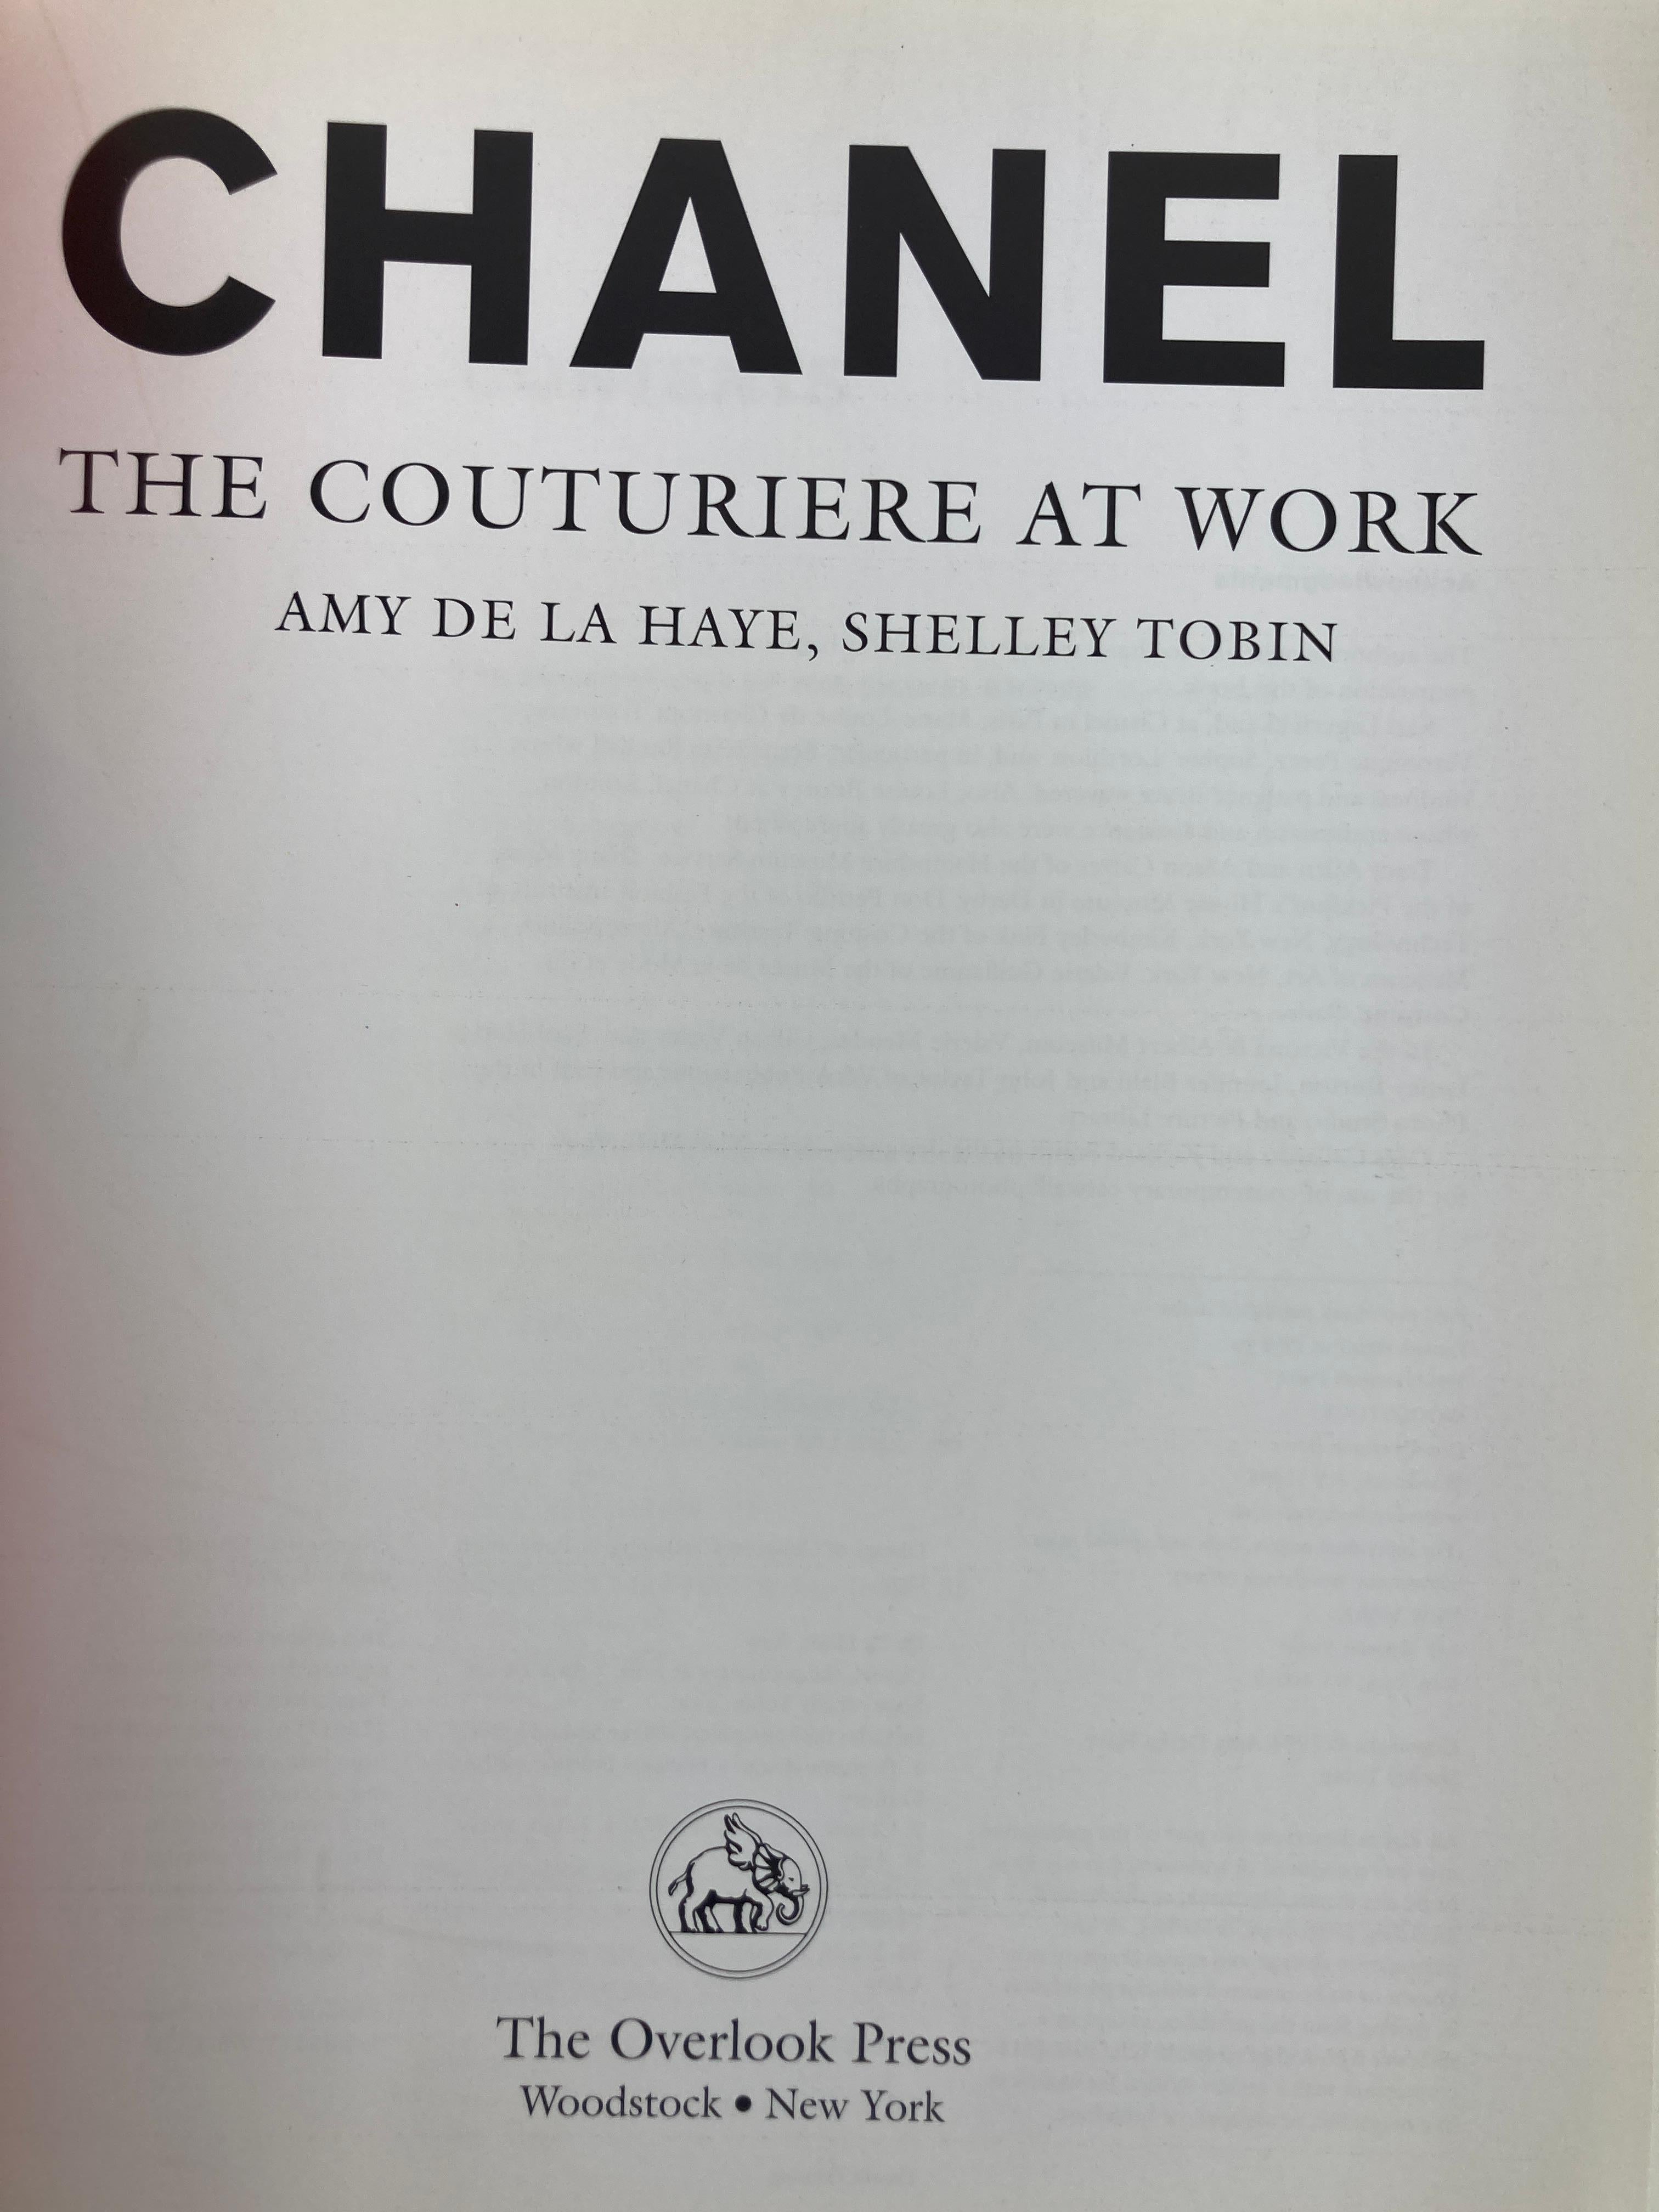 Chanel: The Couturiere at Work Book 1996 1st US Ed. by Amy De la Haye For Sale 2